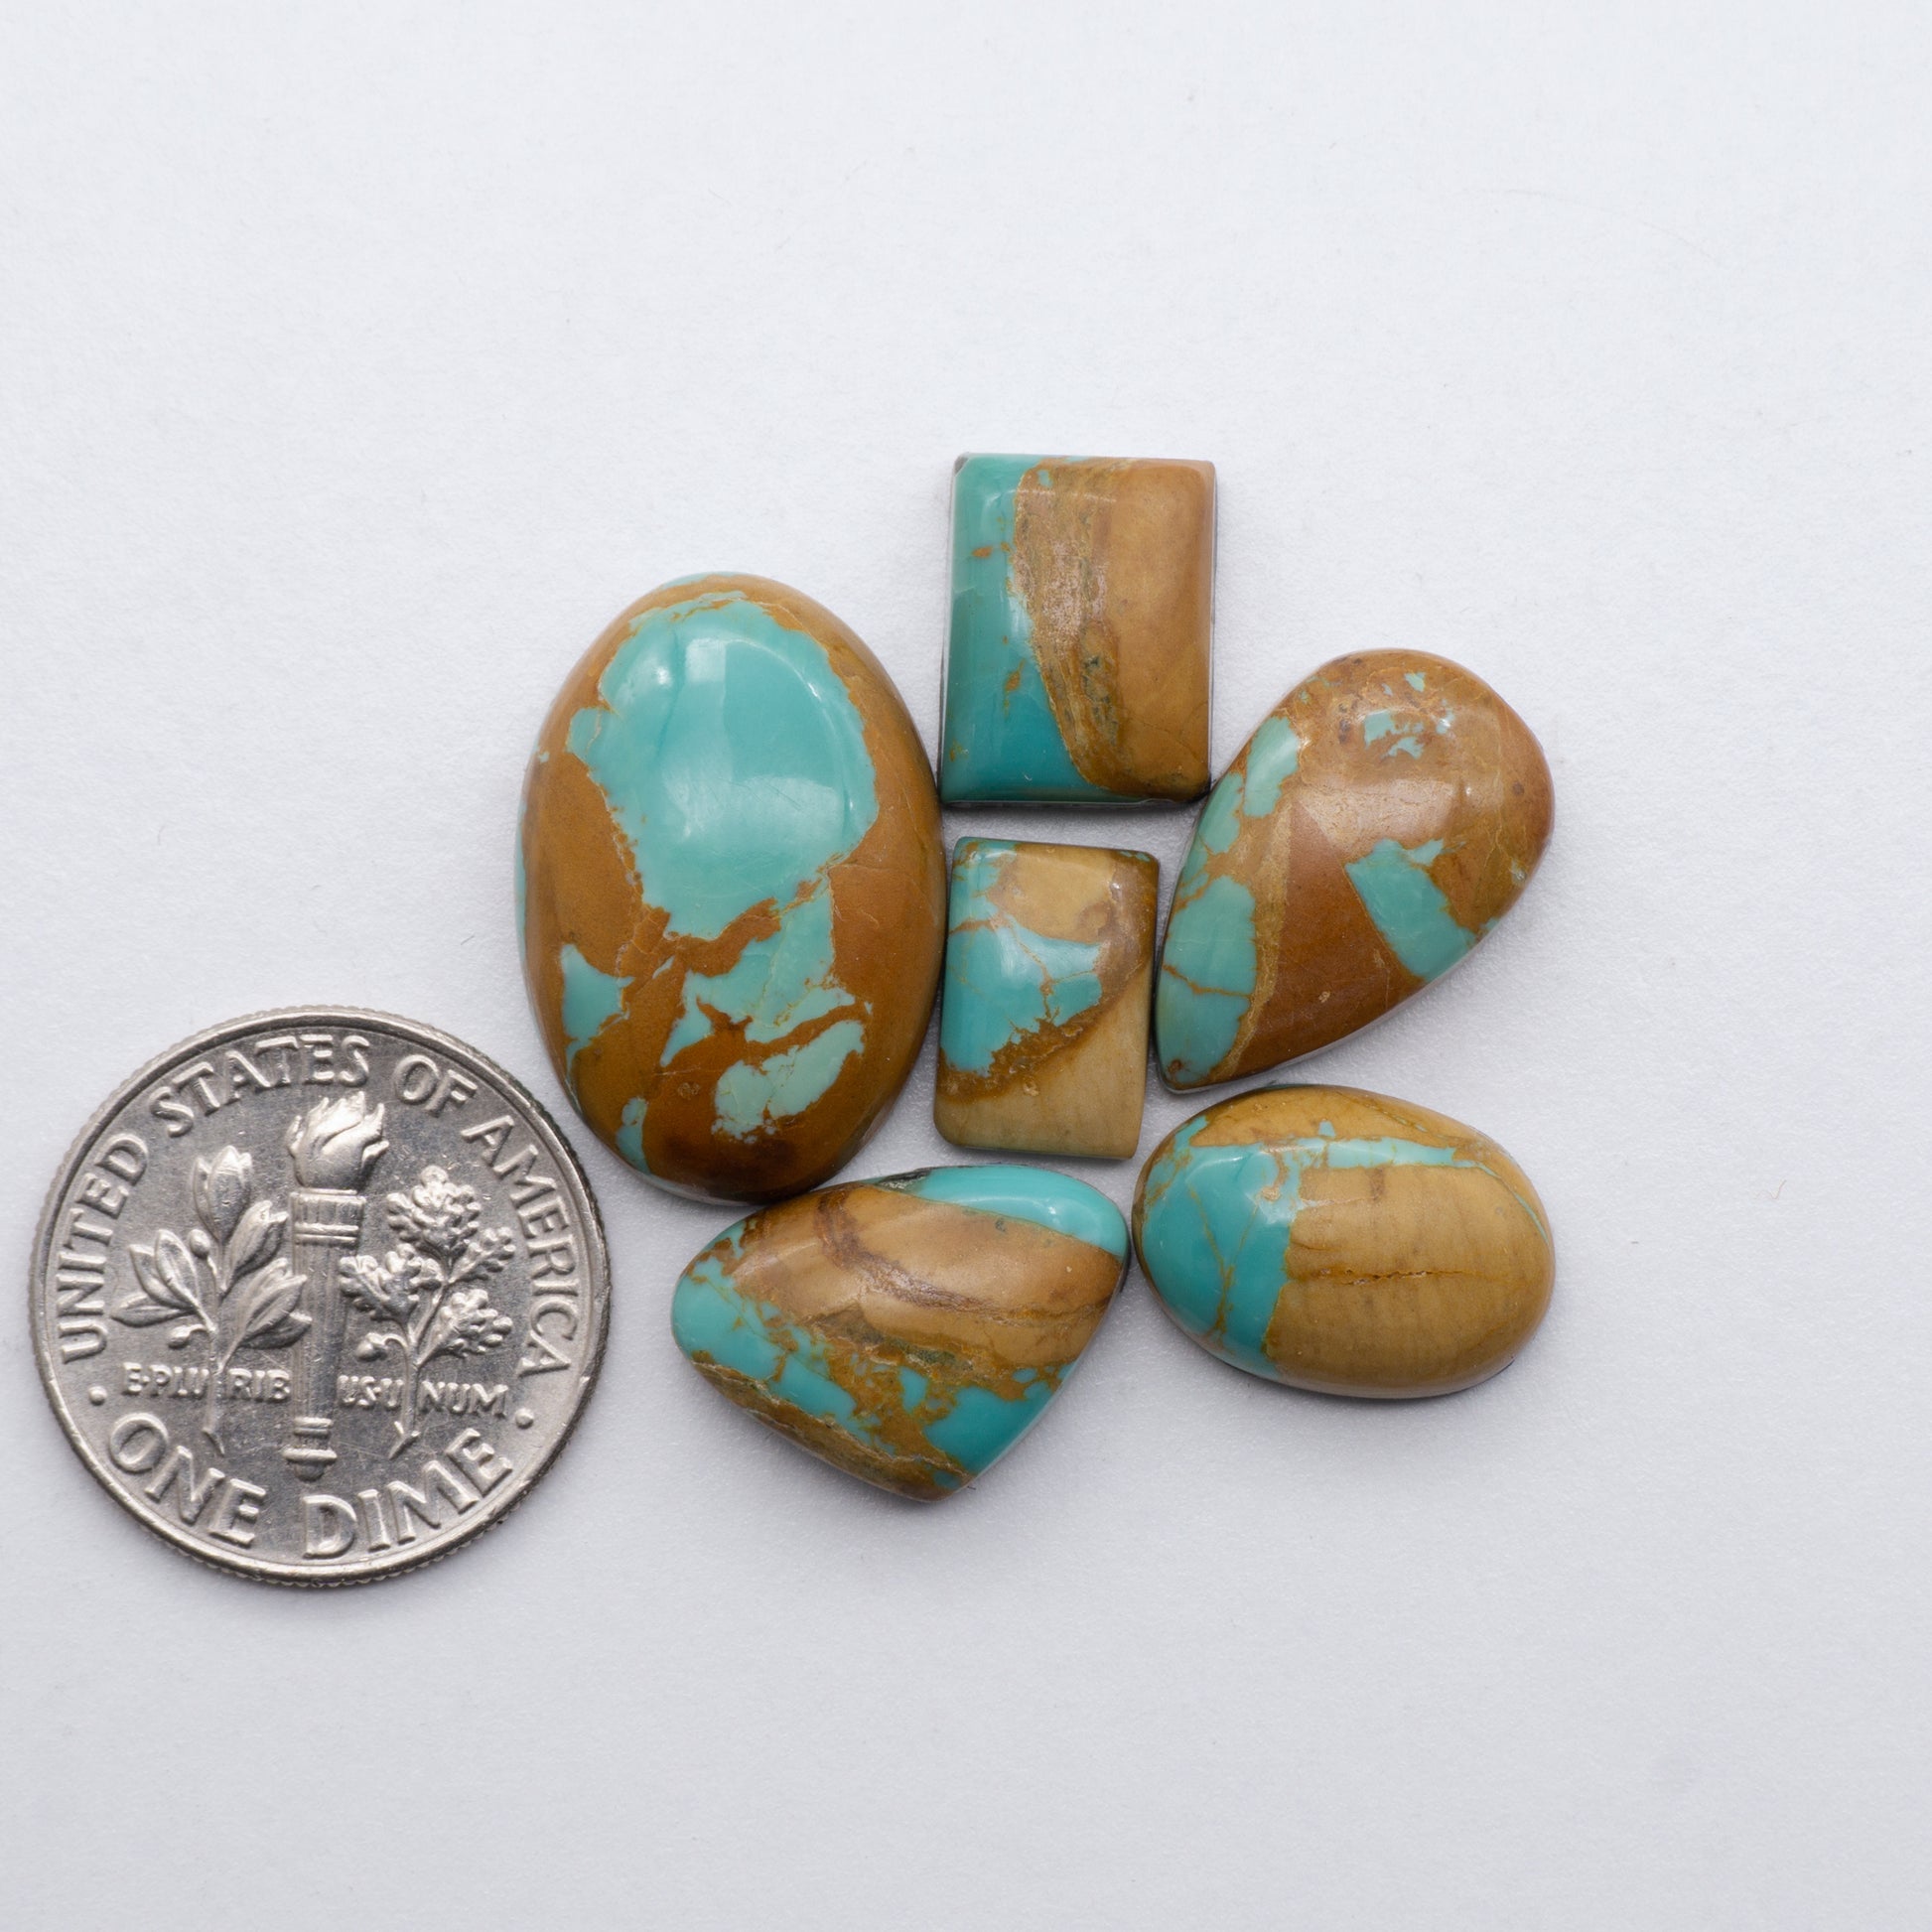 These beautiful blue green turquoise cabochons have a glossy finish and are backed for added strength. Mined in Colorado, USA. Similar to Royston turquoise used for jewelry making.